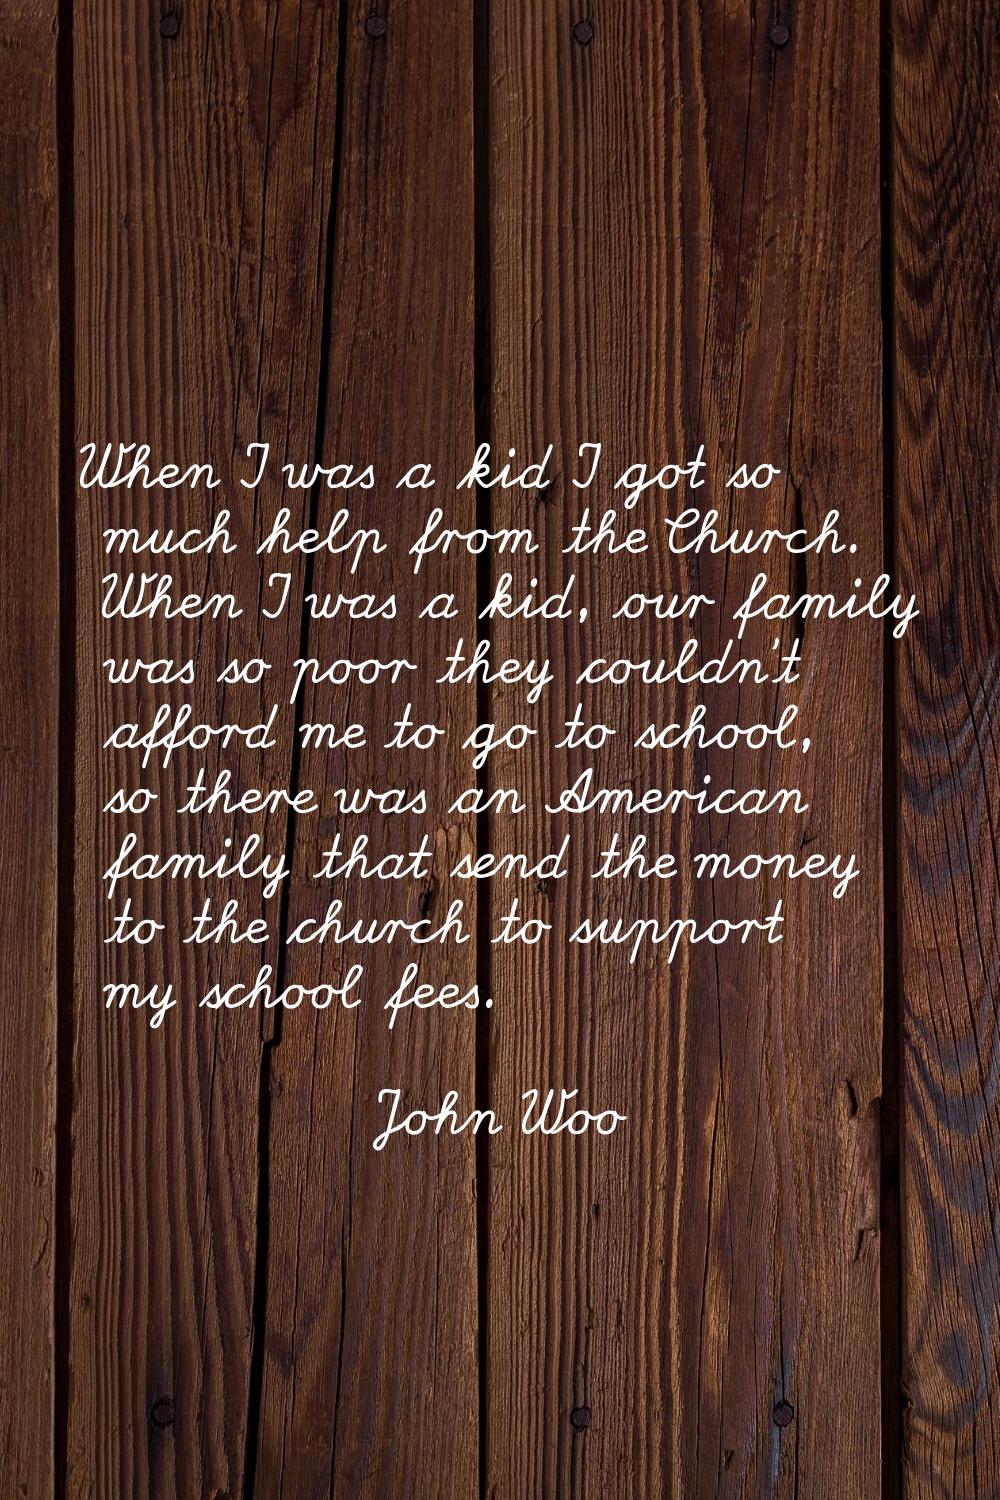 When I was a kid I got so much help from the Church. When I was a kid, our family was so poor they 